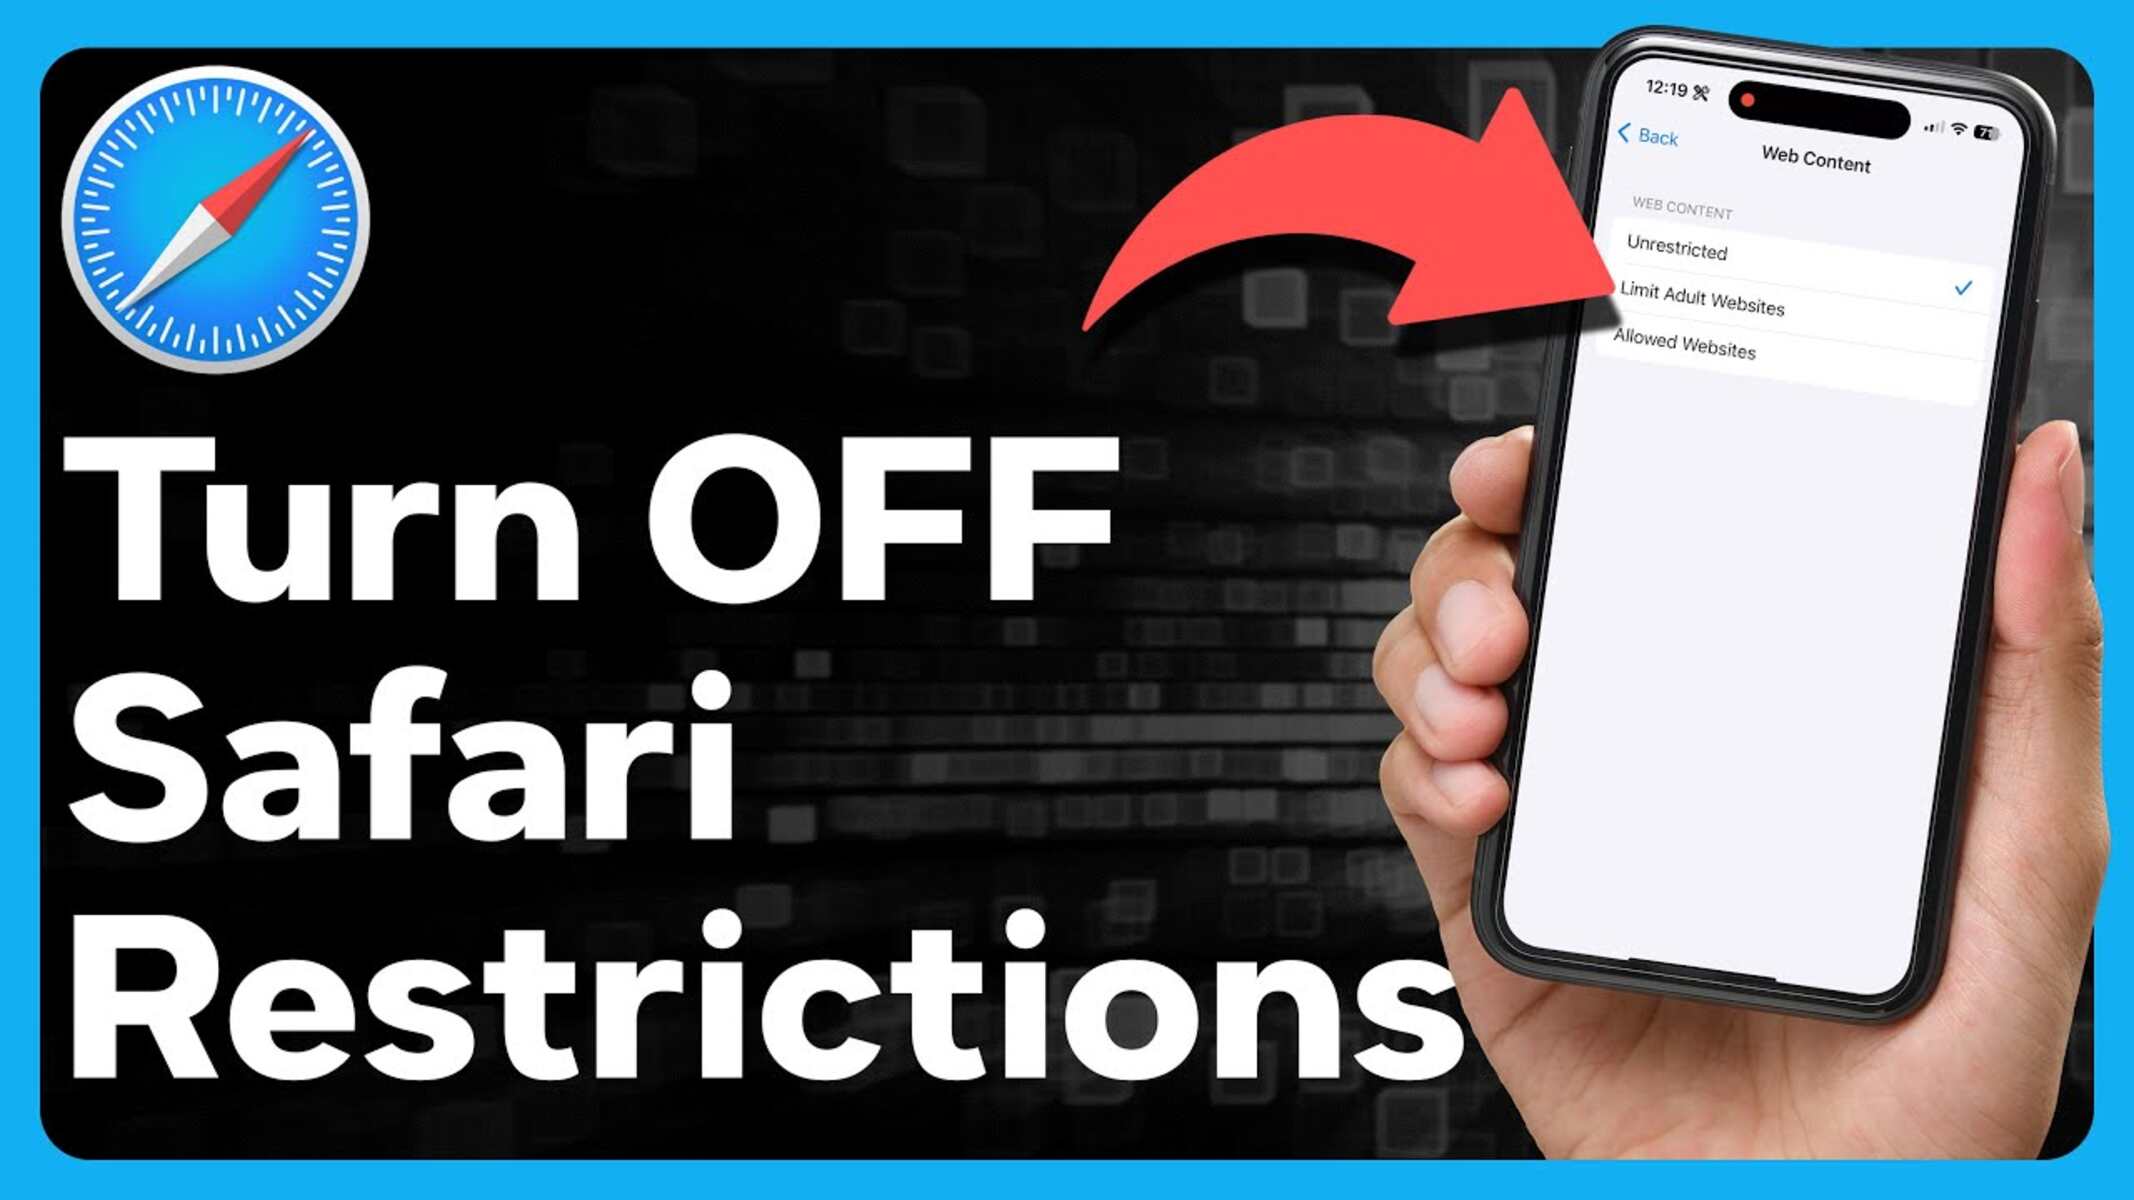 How To Turn Safari Restrictions Off